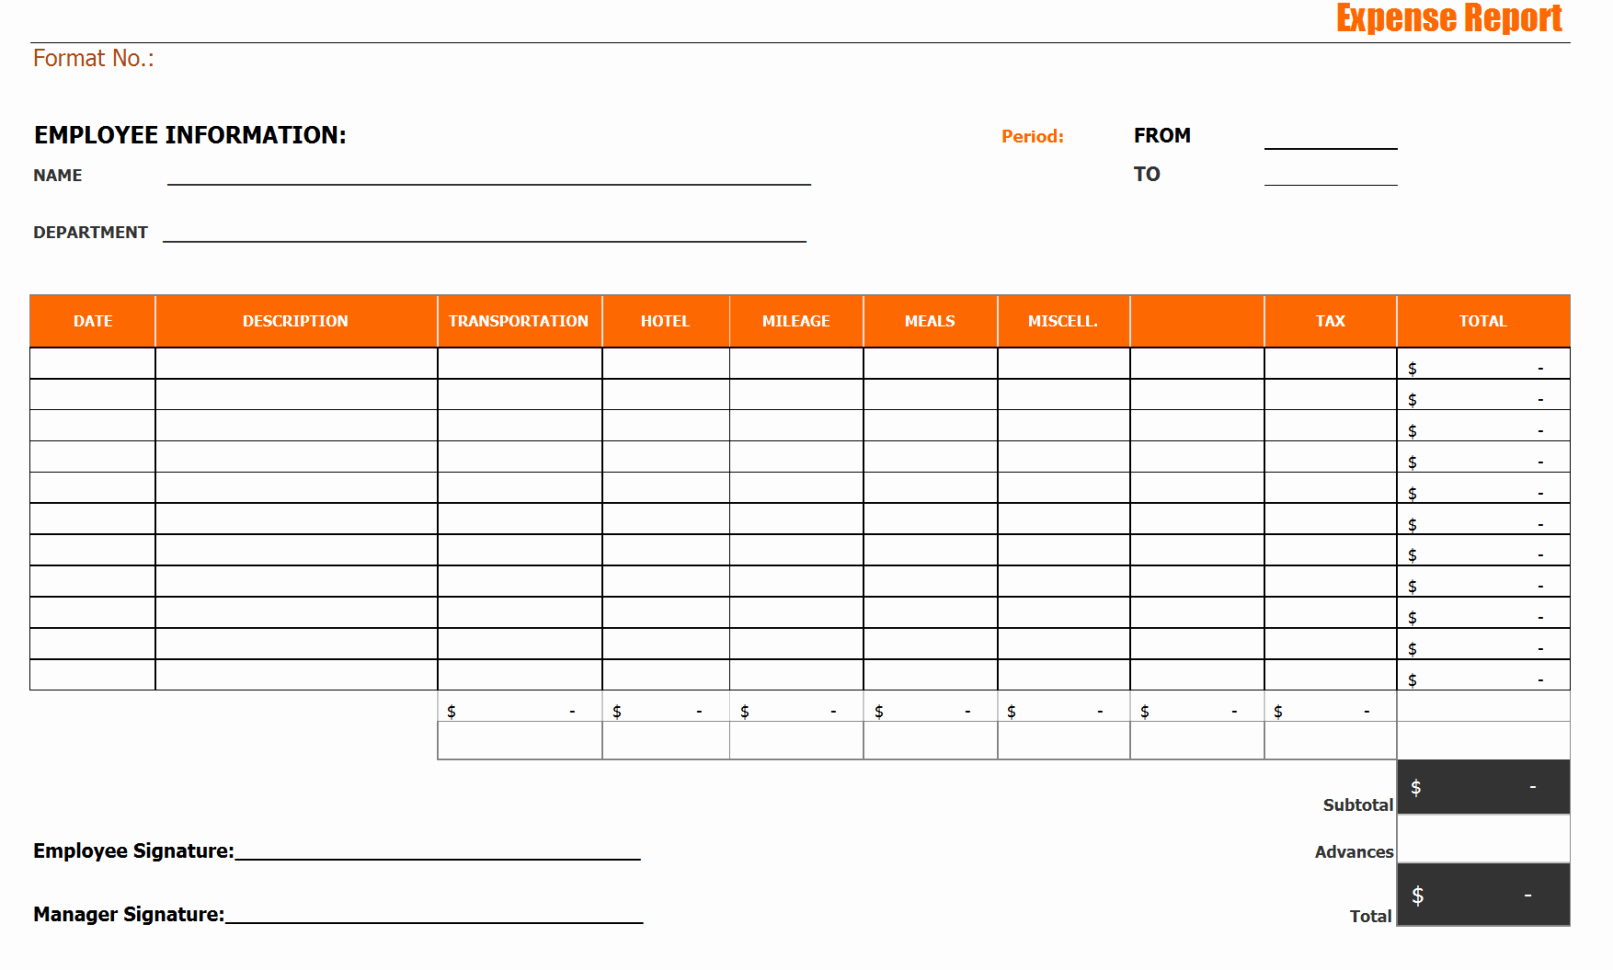 Expense Report Template Excel Unique Fice Expense Report Spreadsheet Templates for Busines